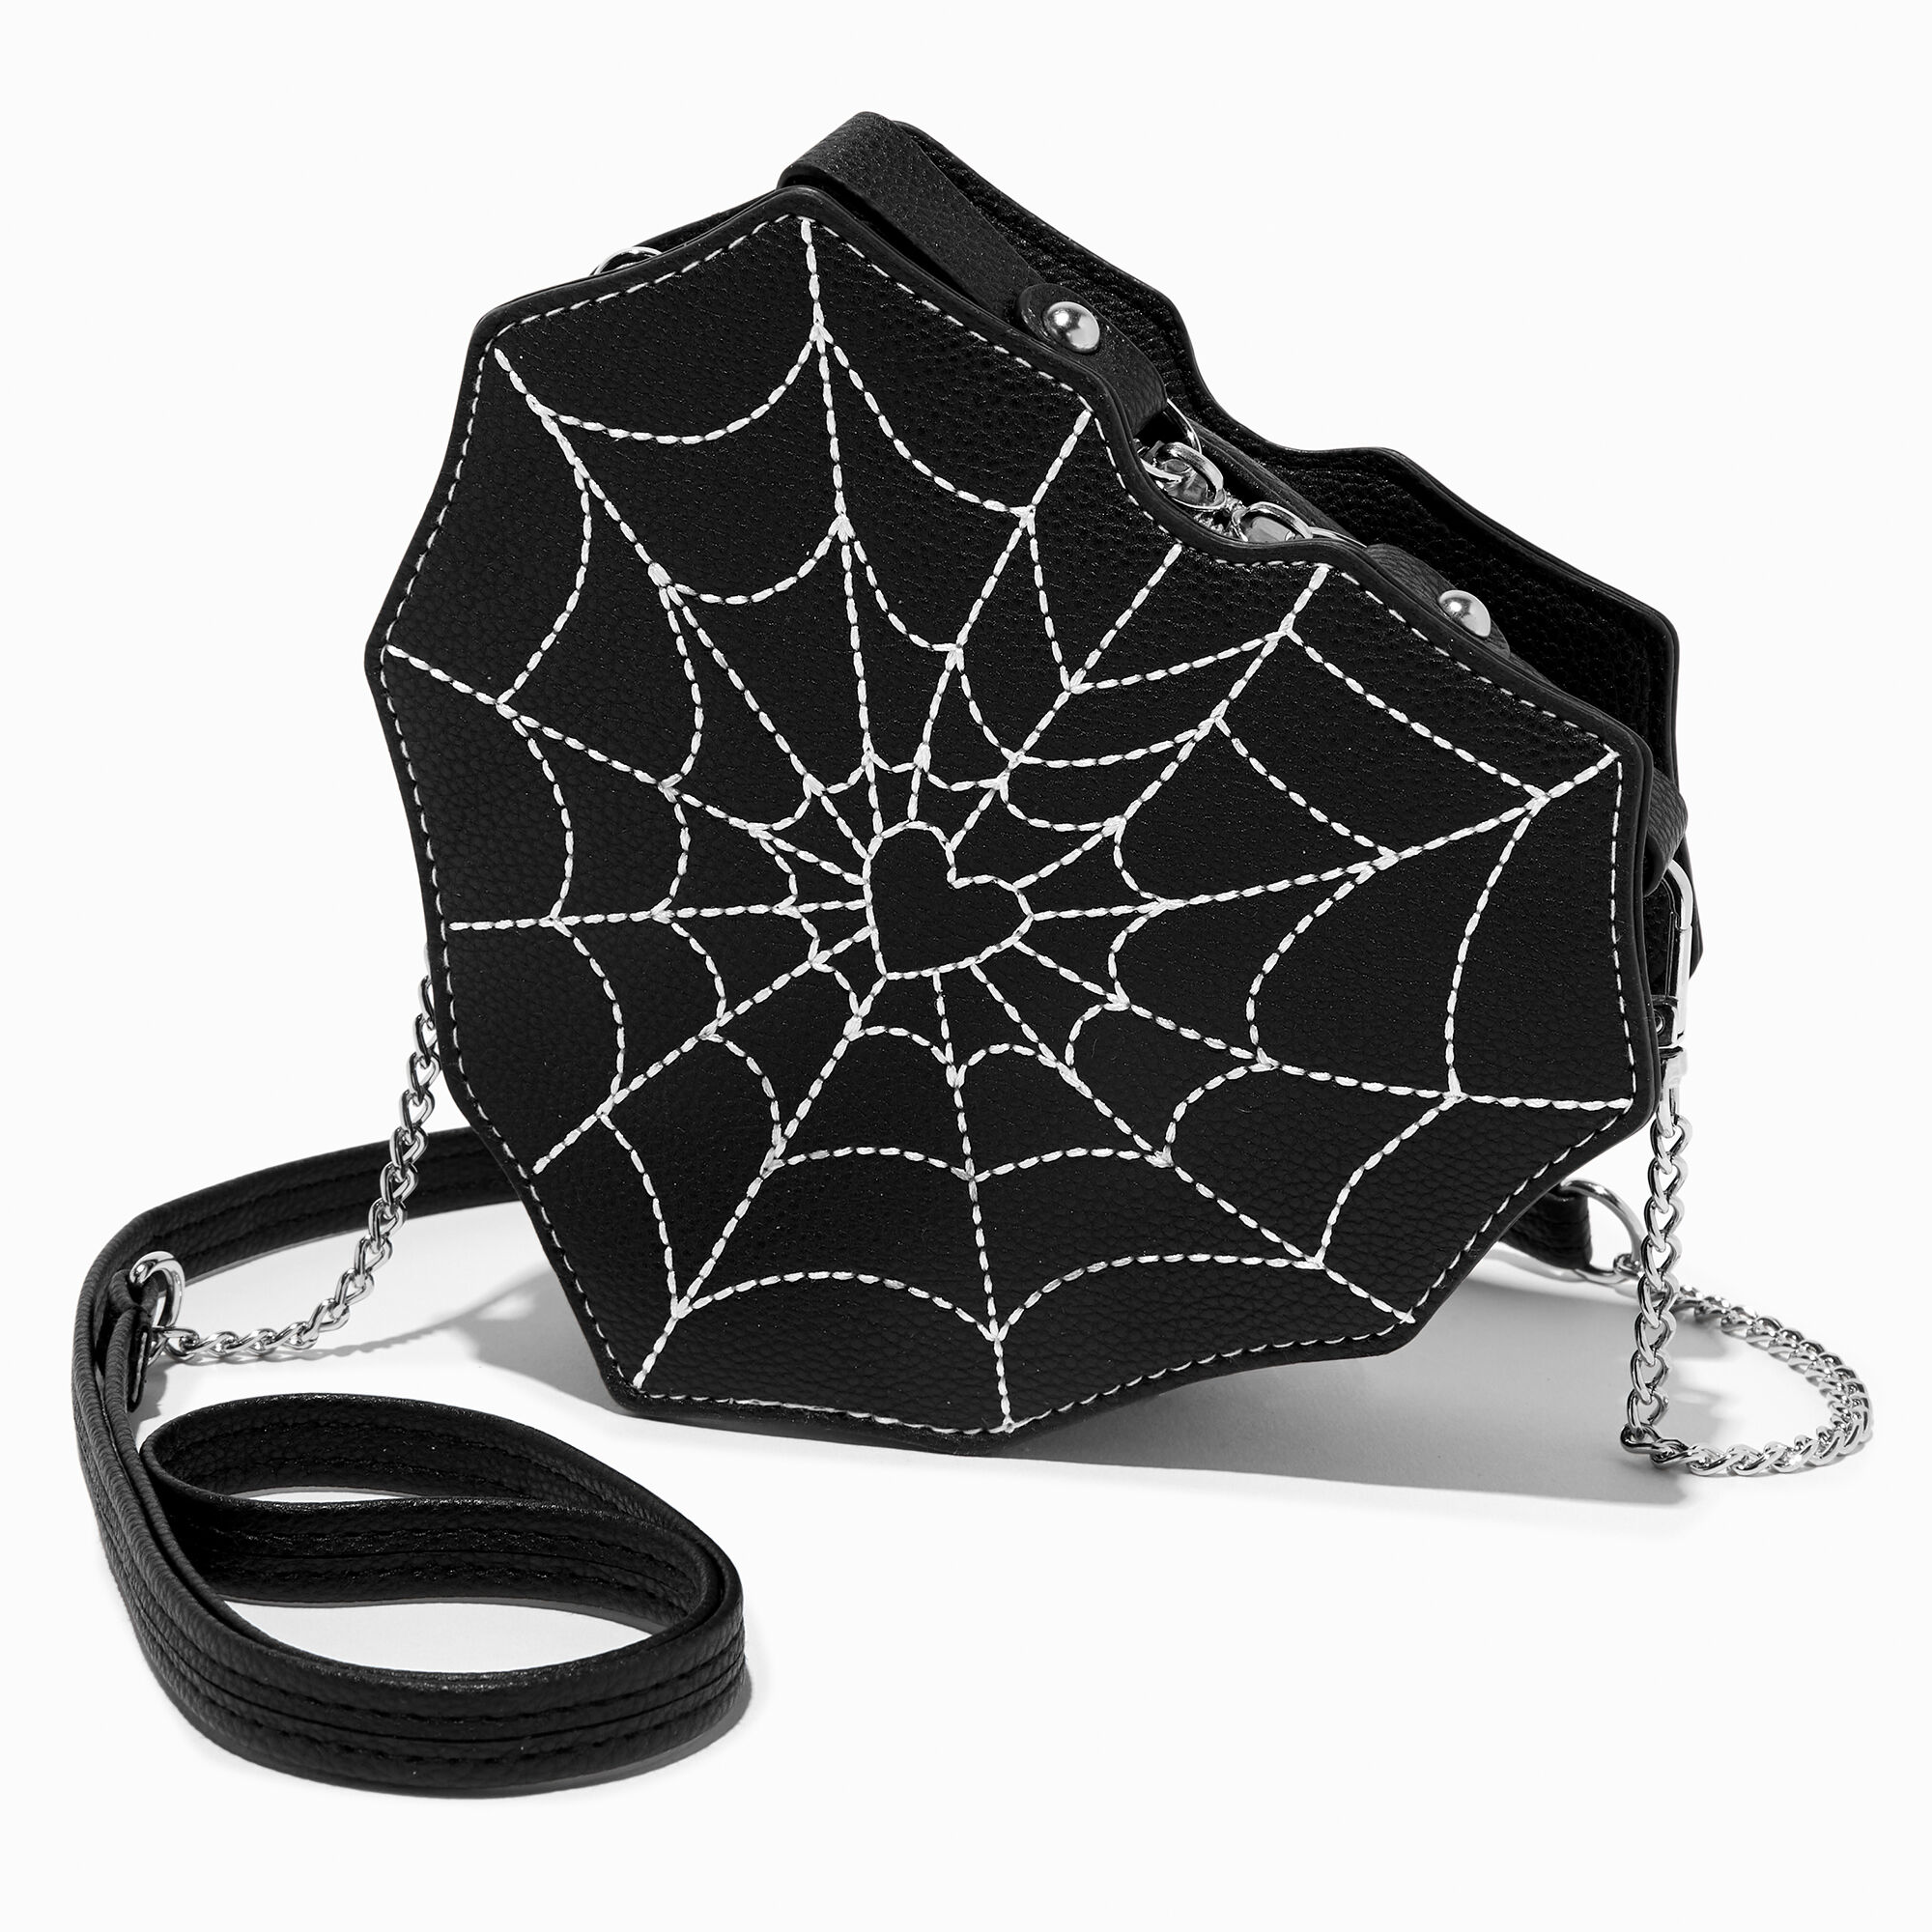 View Claires Spider Web Heart Shaped Crossbody Bag Black information